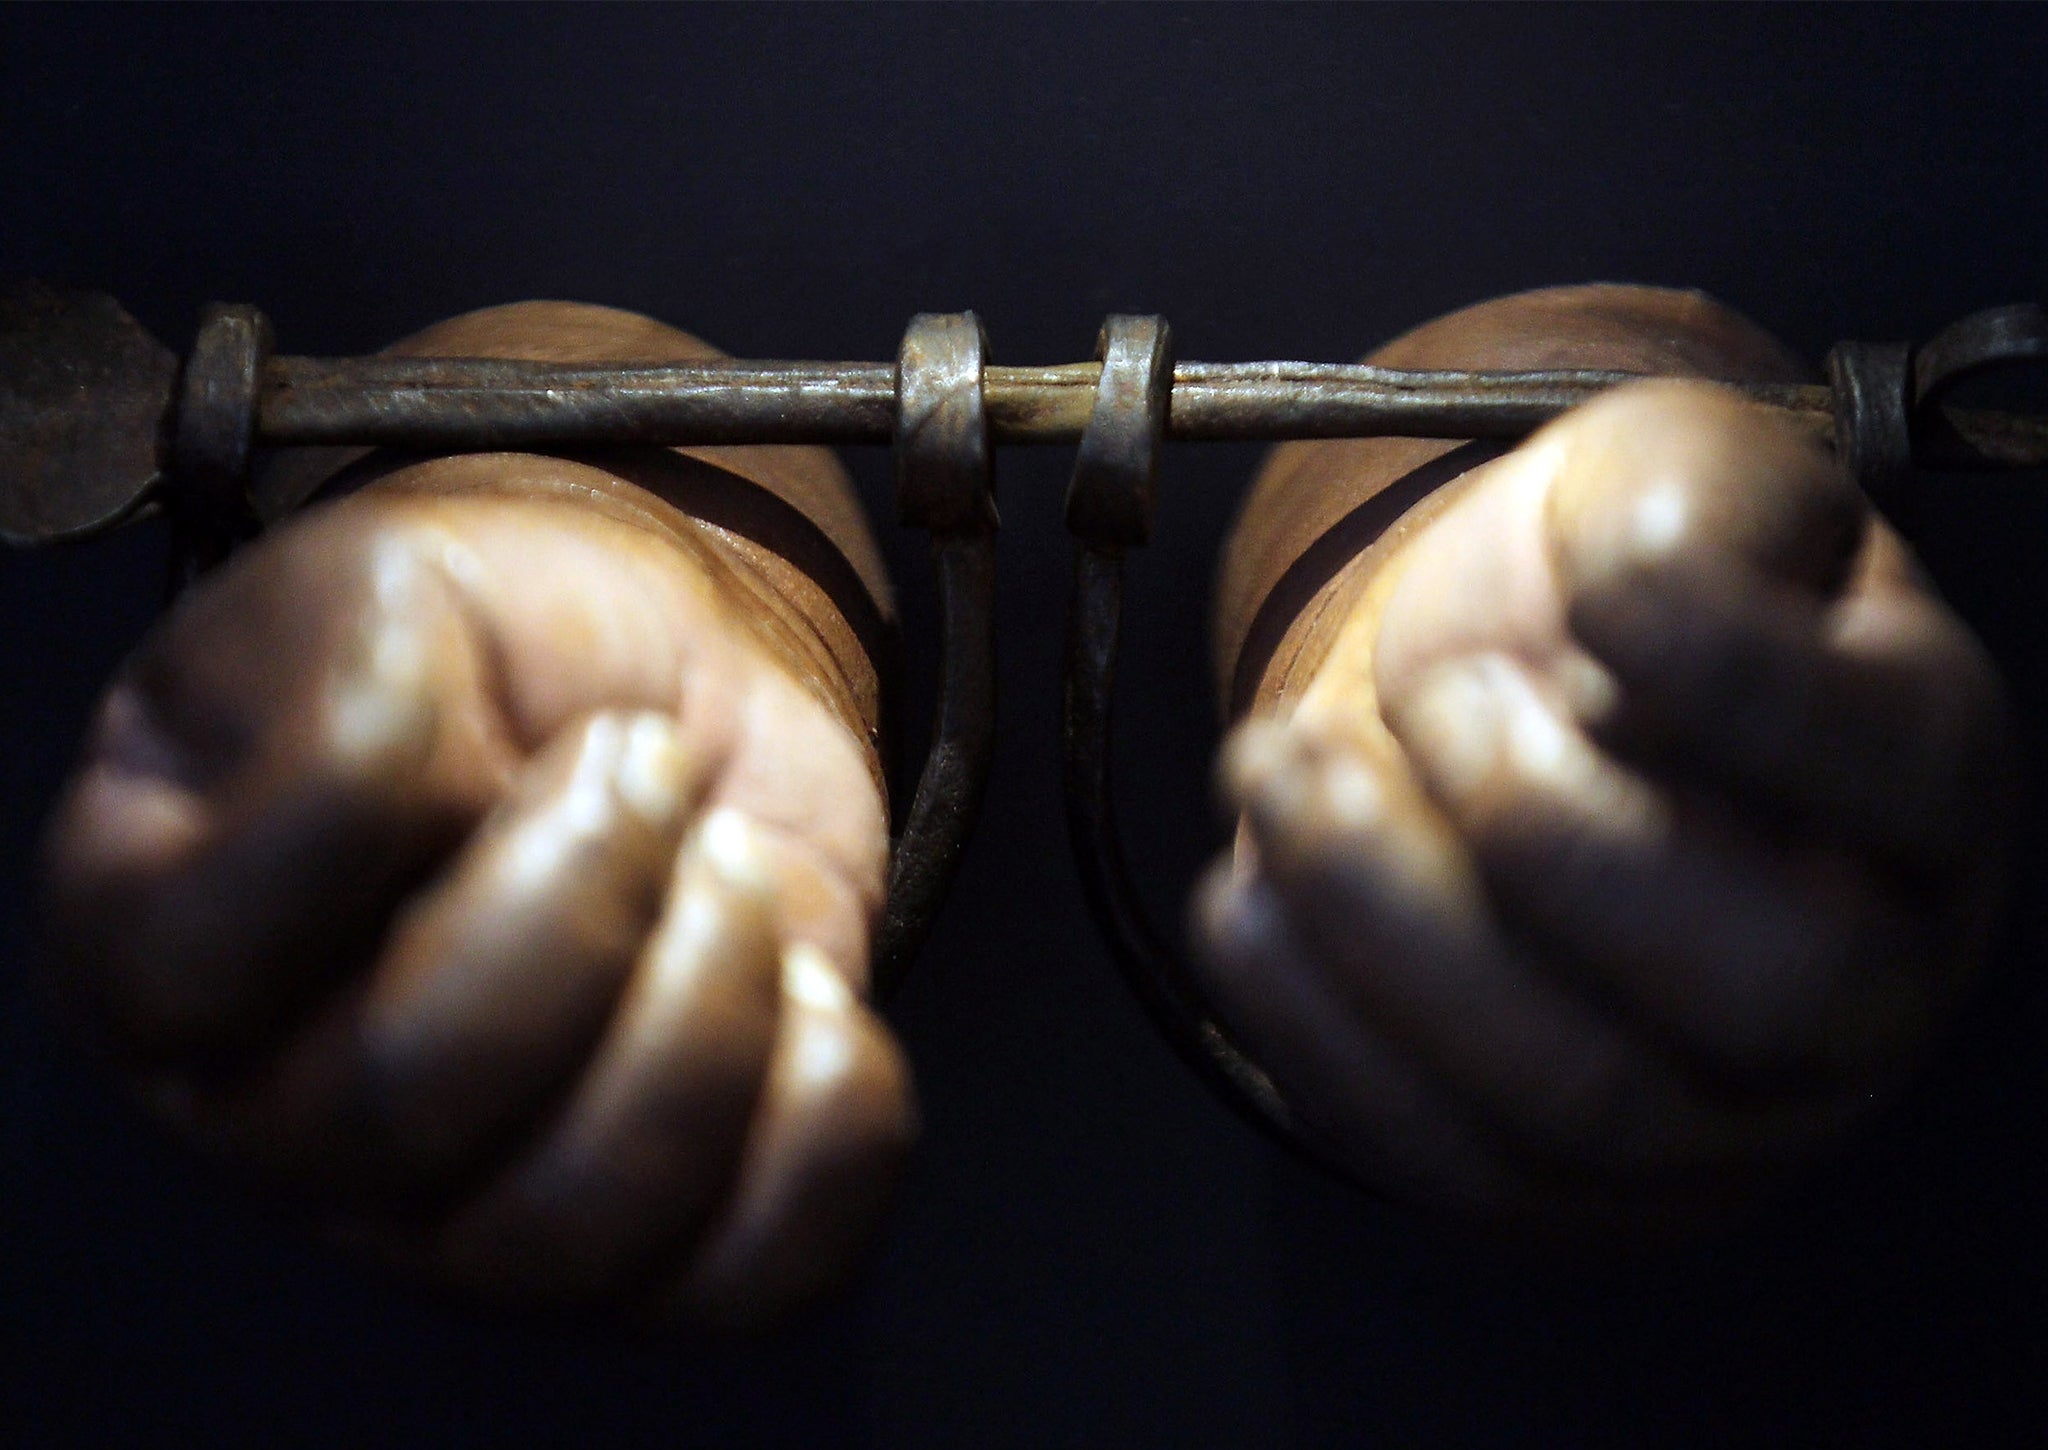 Shackles for slave children are seen on display at the New-York Historical Society on February 1, 2012 in New York City